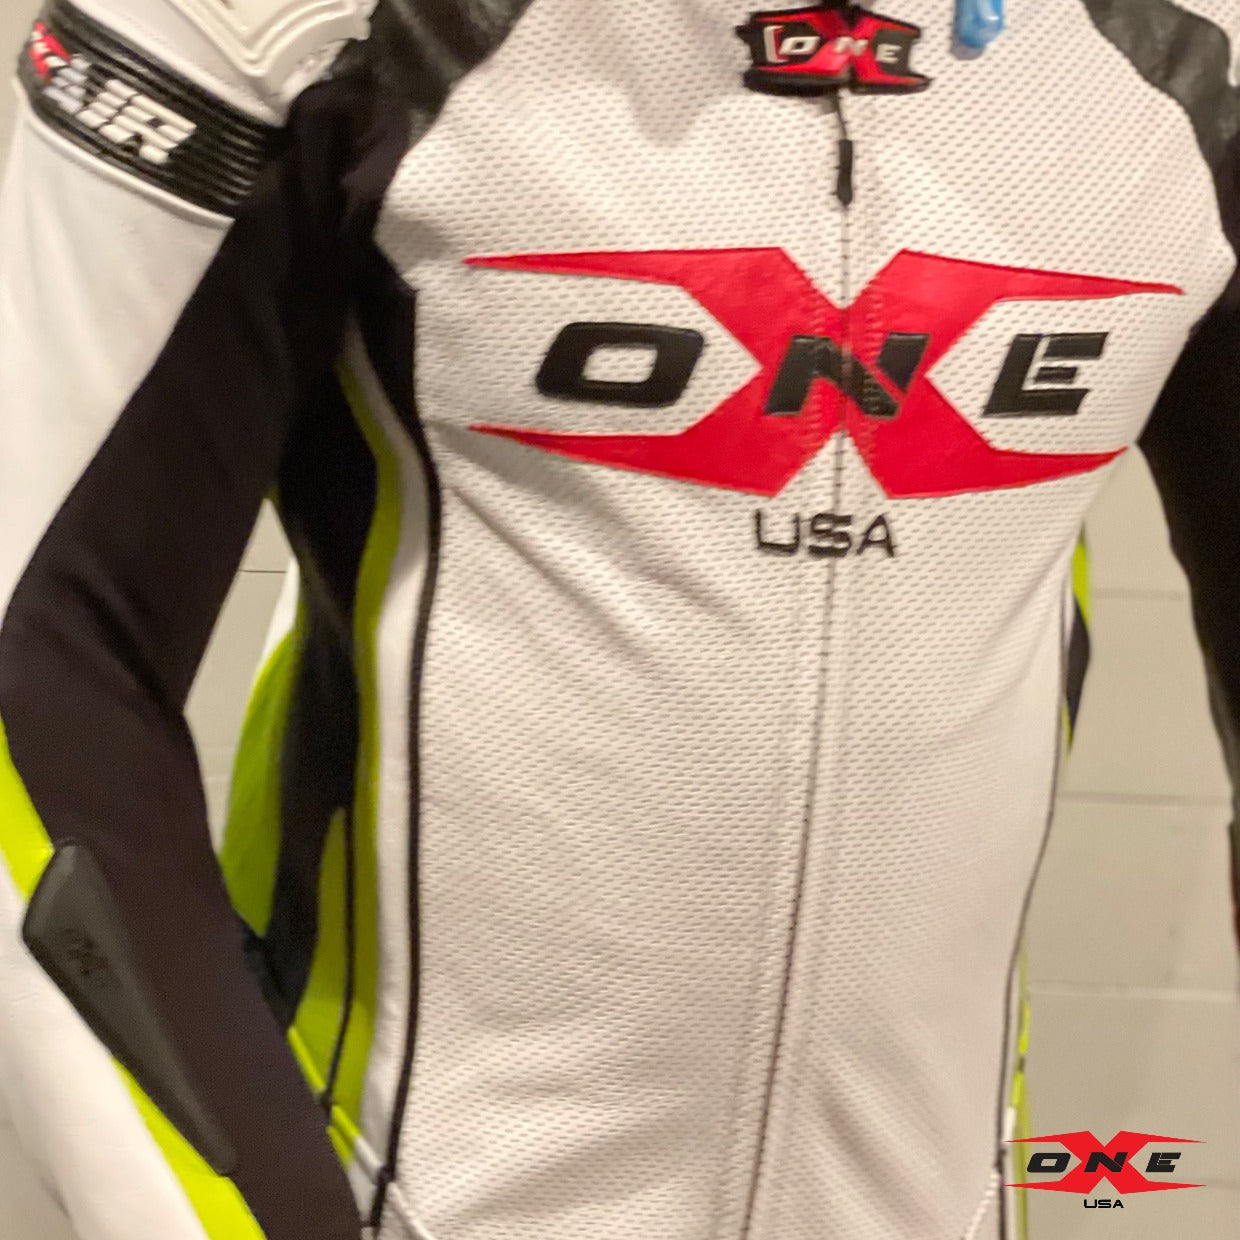 OneX USA XR22 Airbag Ready Pro Race Suit - White/Fluor Yellow